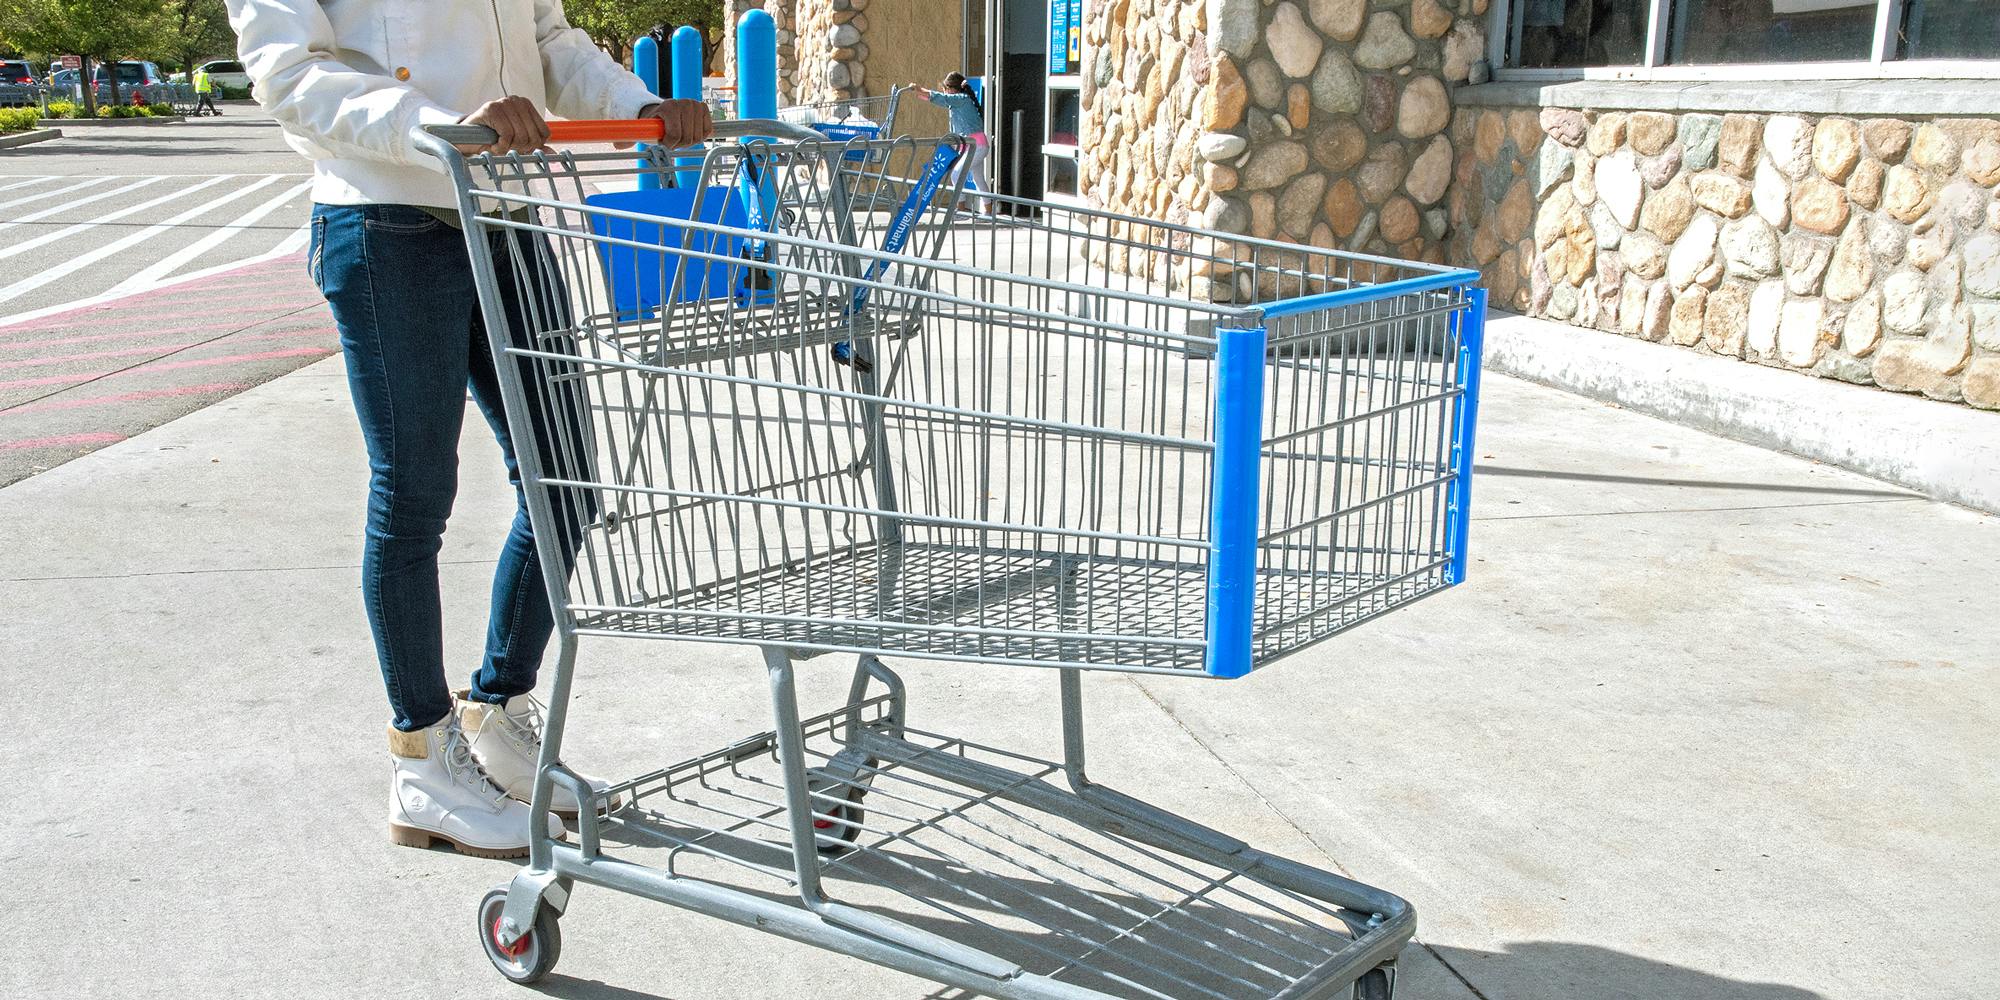 TikTok Fact Check: Will You Have to Pay for Walmart Carts Soon?